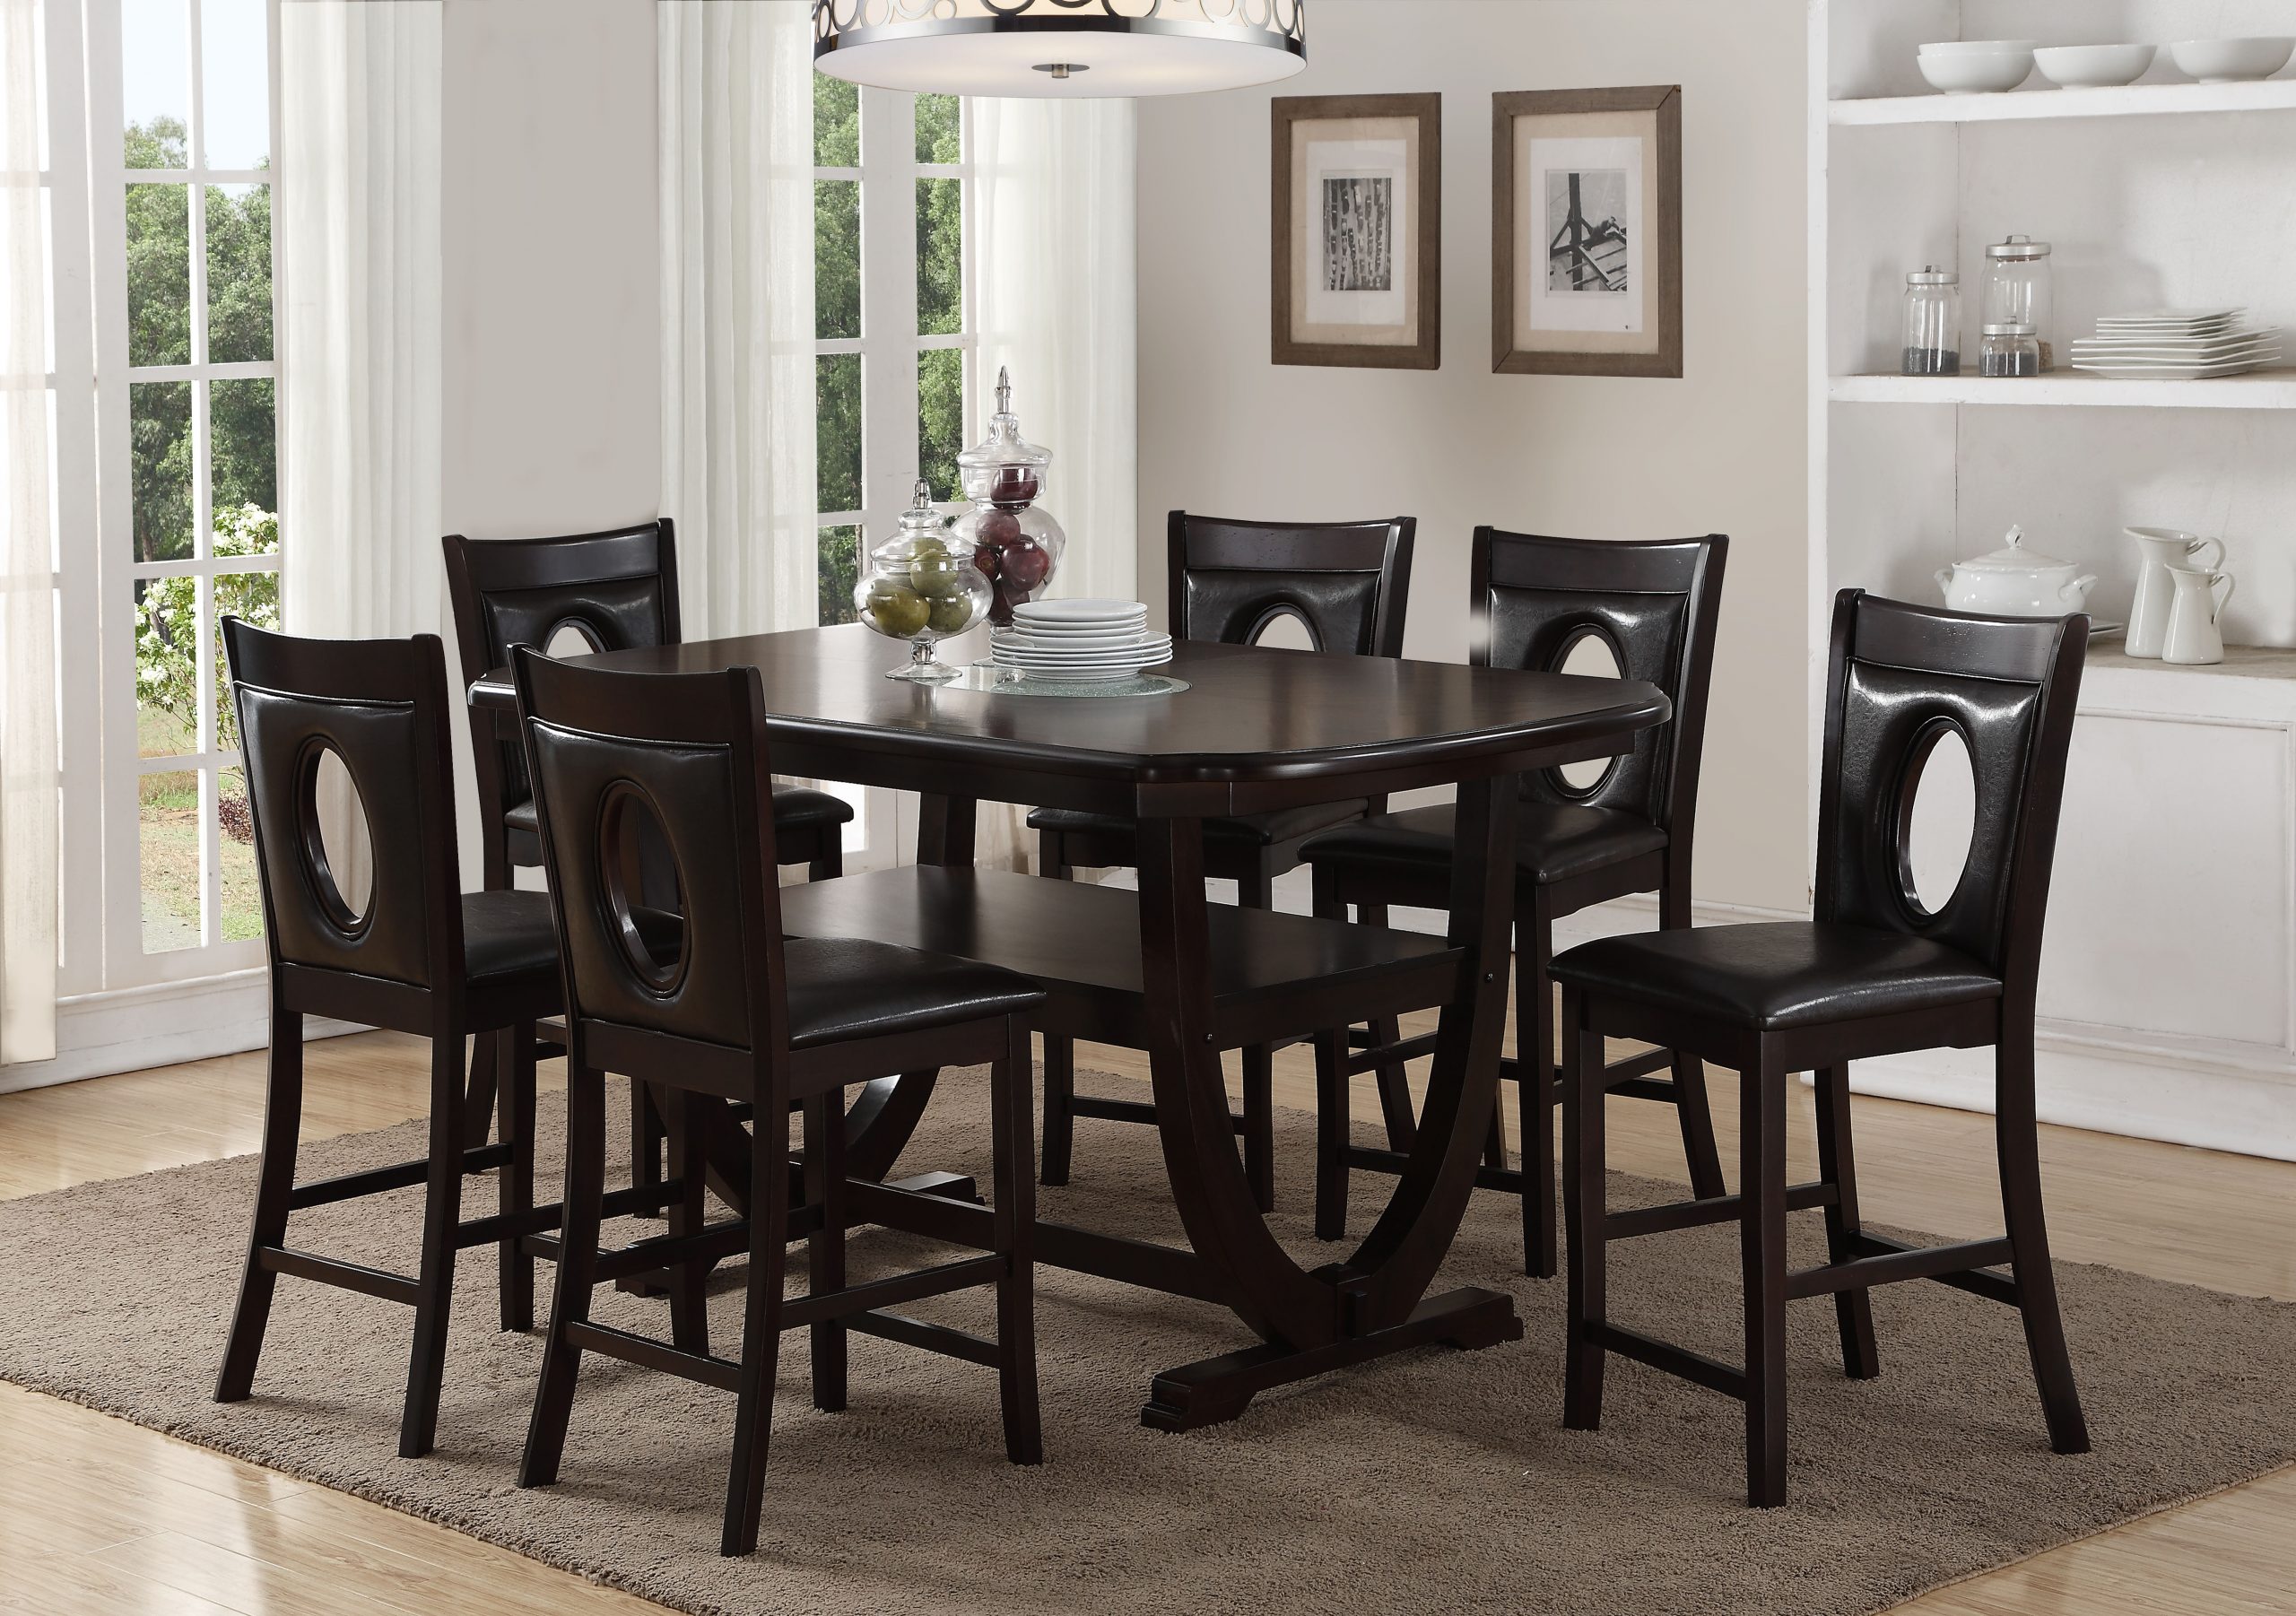 ESPRESSO COUNTER HEIGHT DINING SET W/ 6 CHAIRS